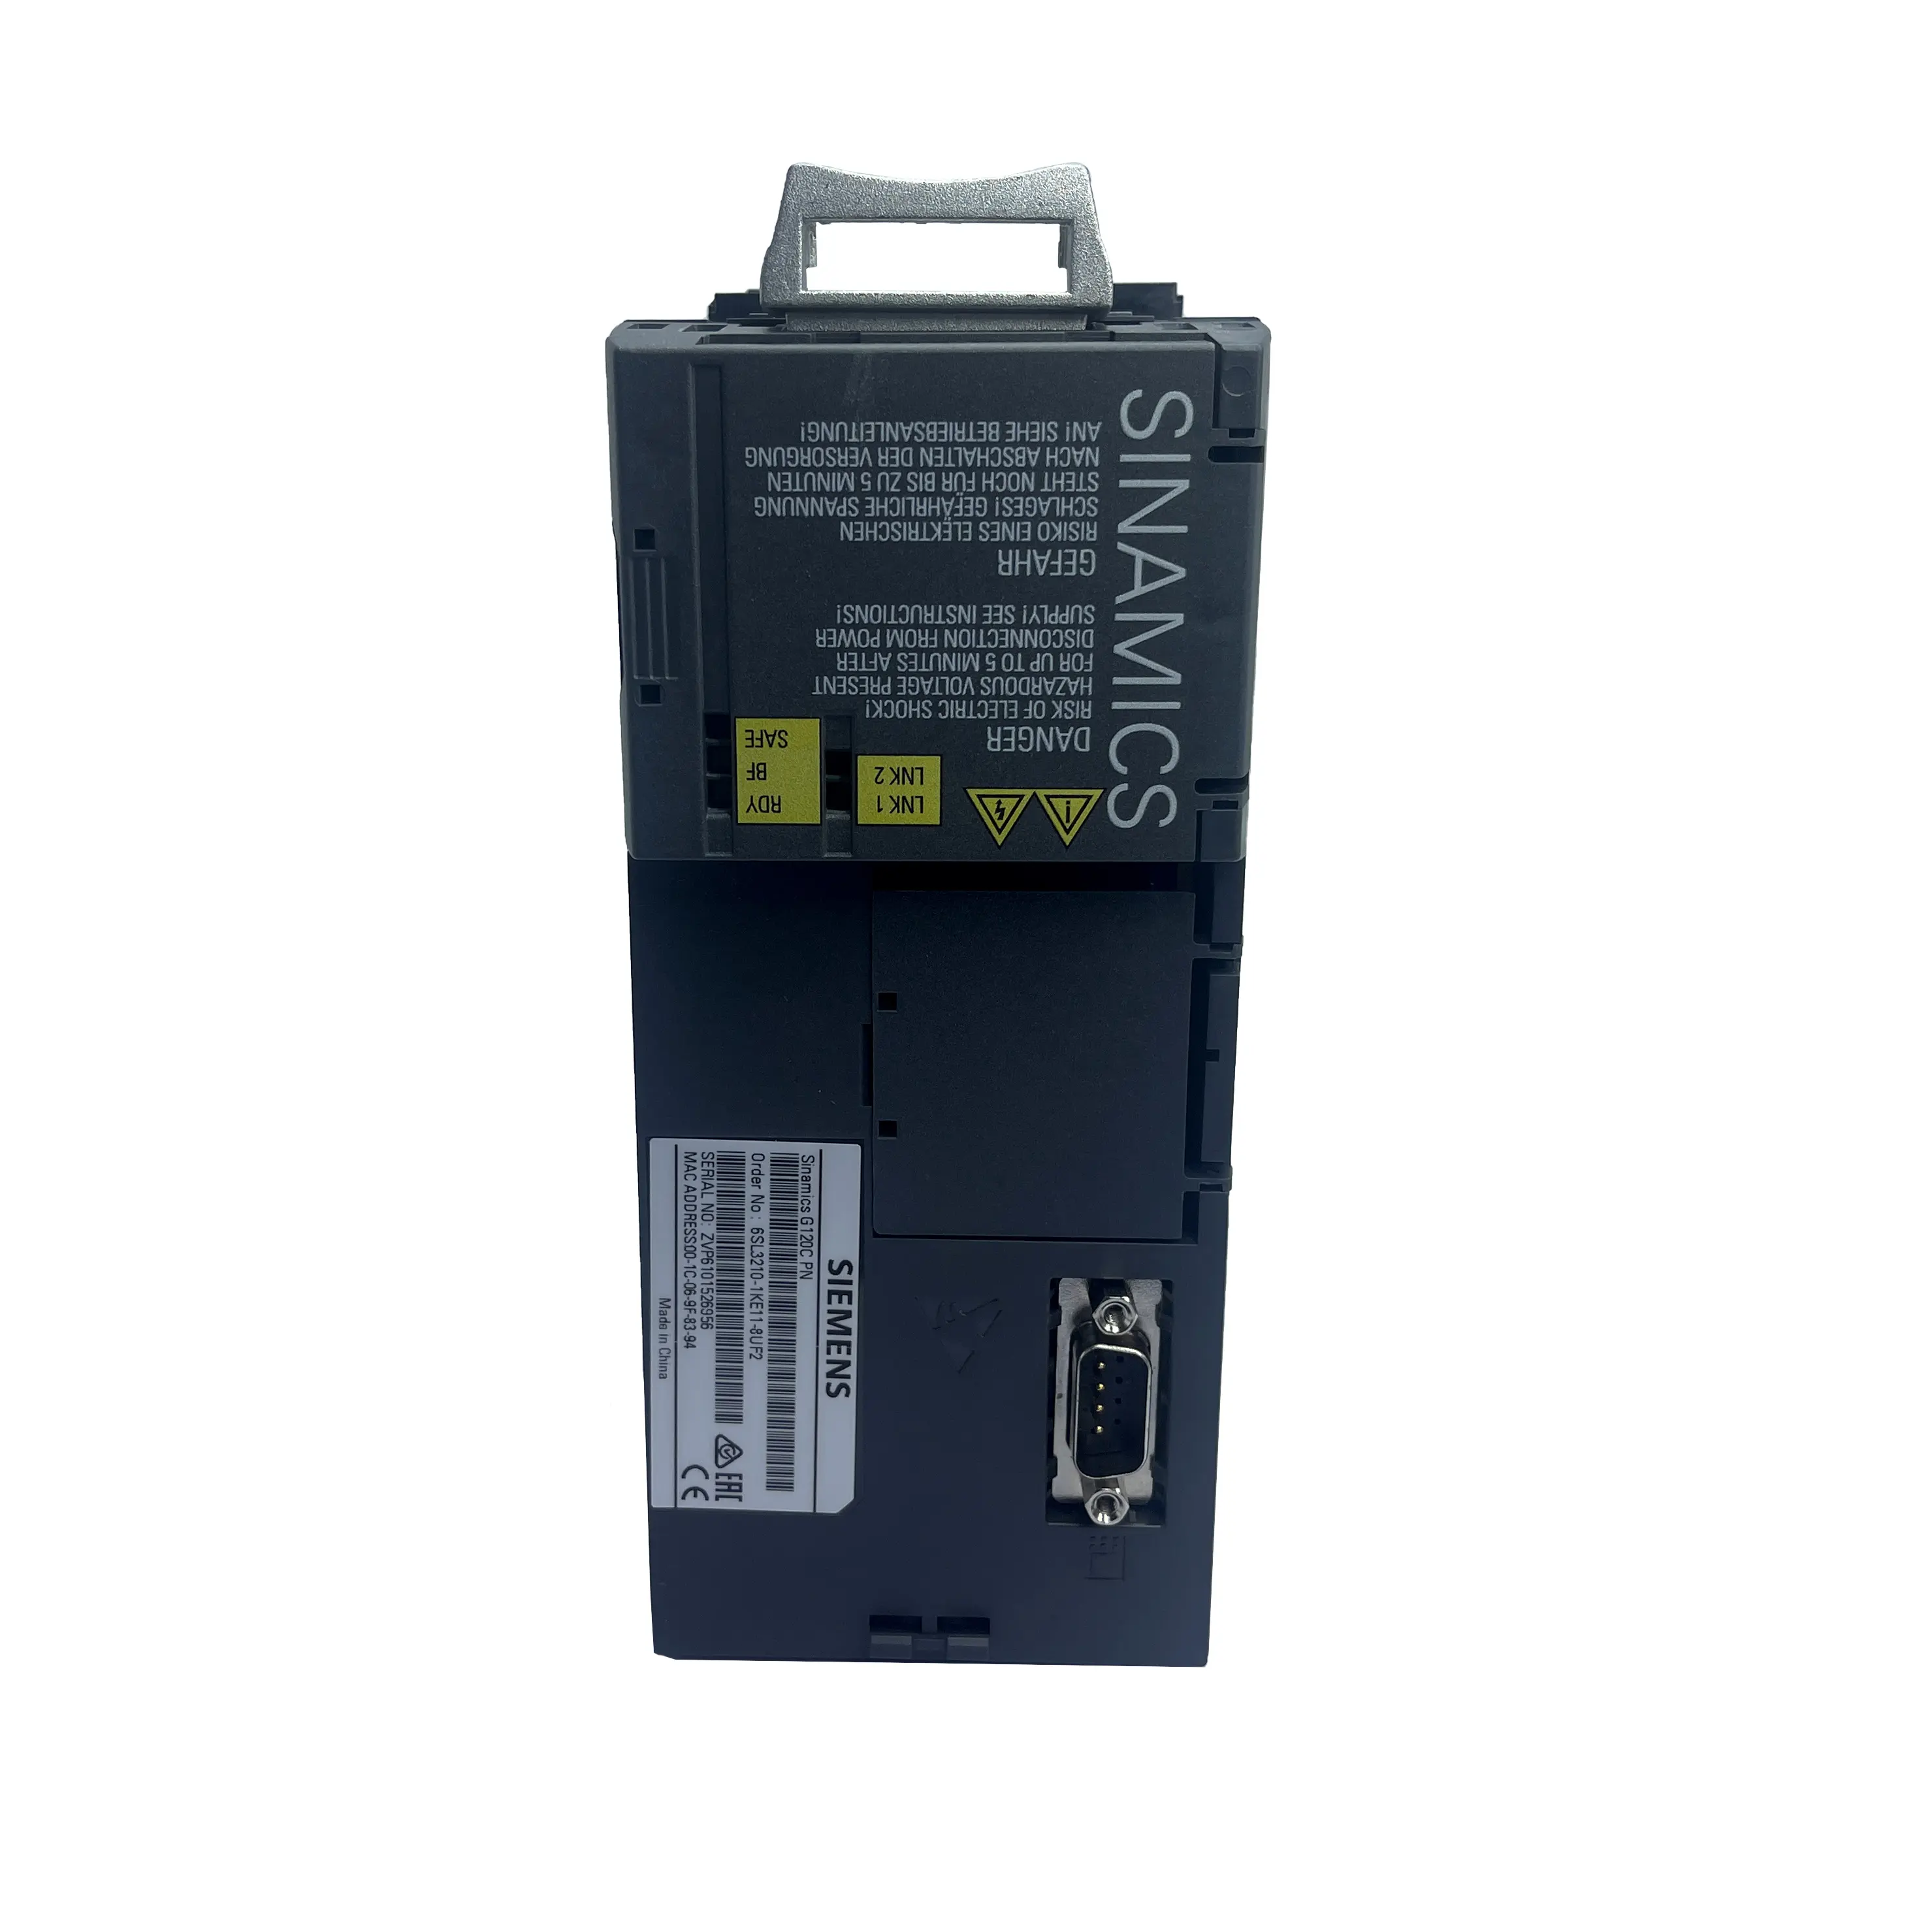 Hot selling 6SL3210-1KE11-8UF2 47-63Hz 23A 0.55kW 0.75HP FREQUENCY CONVERTER In Stock